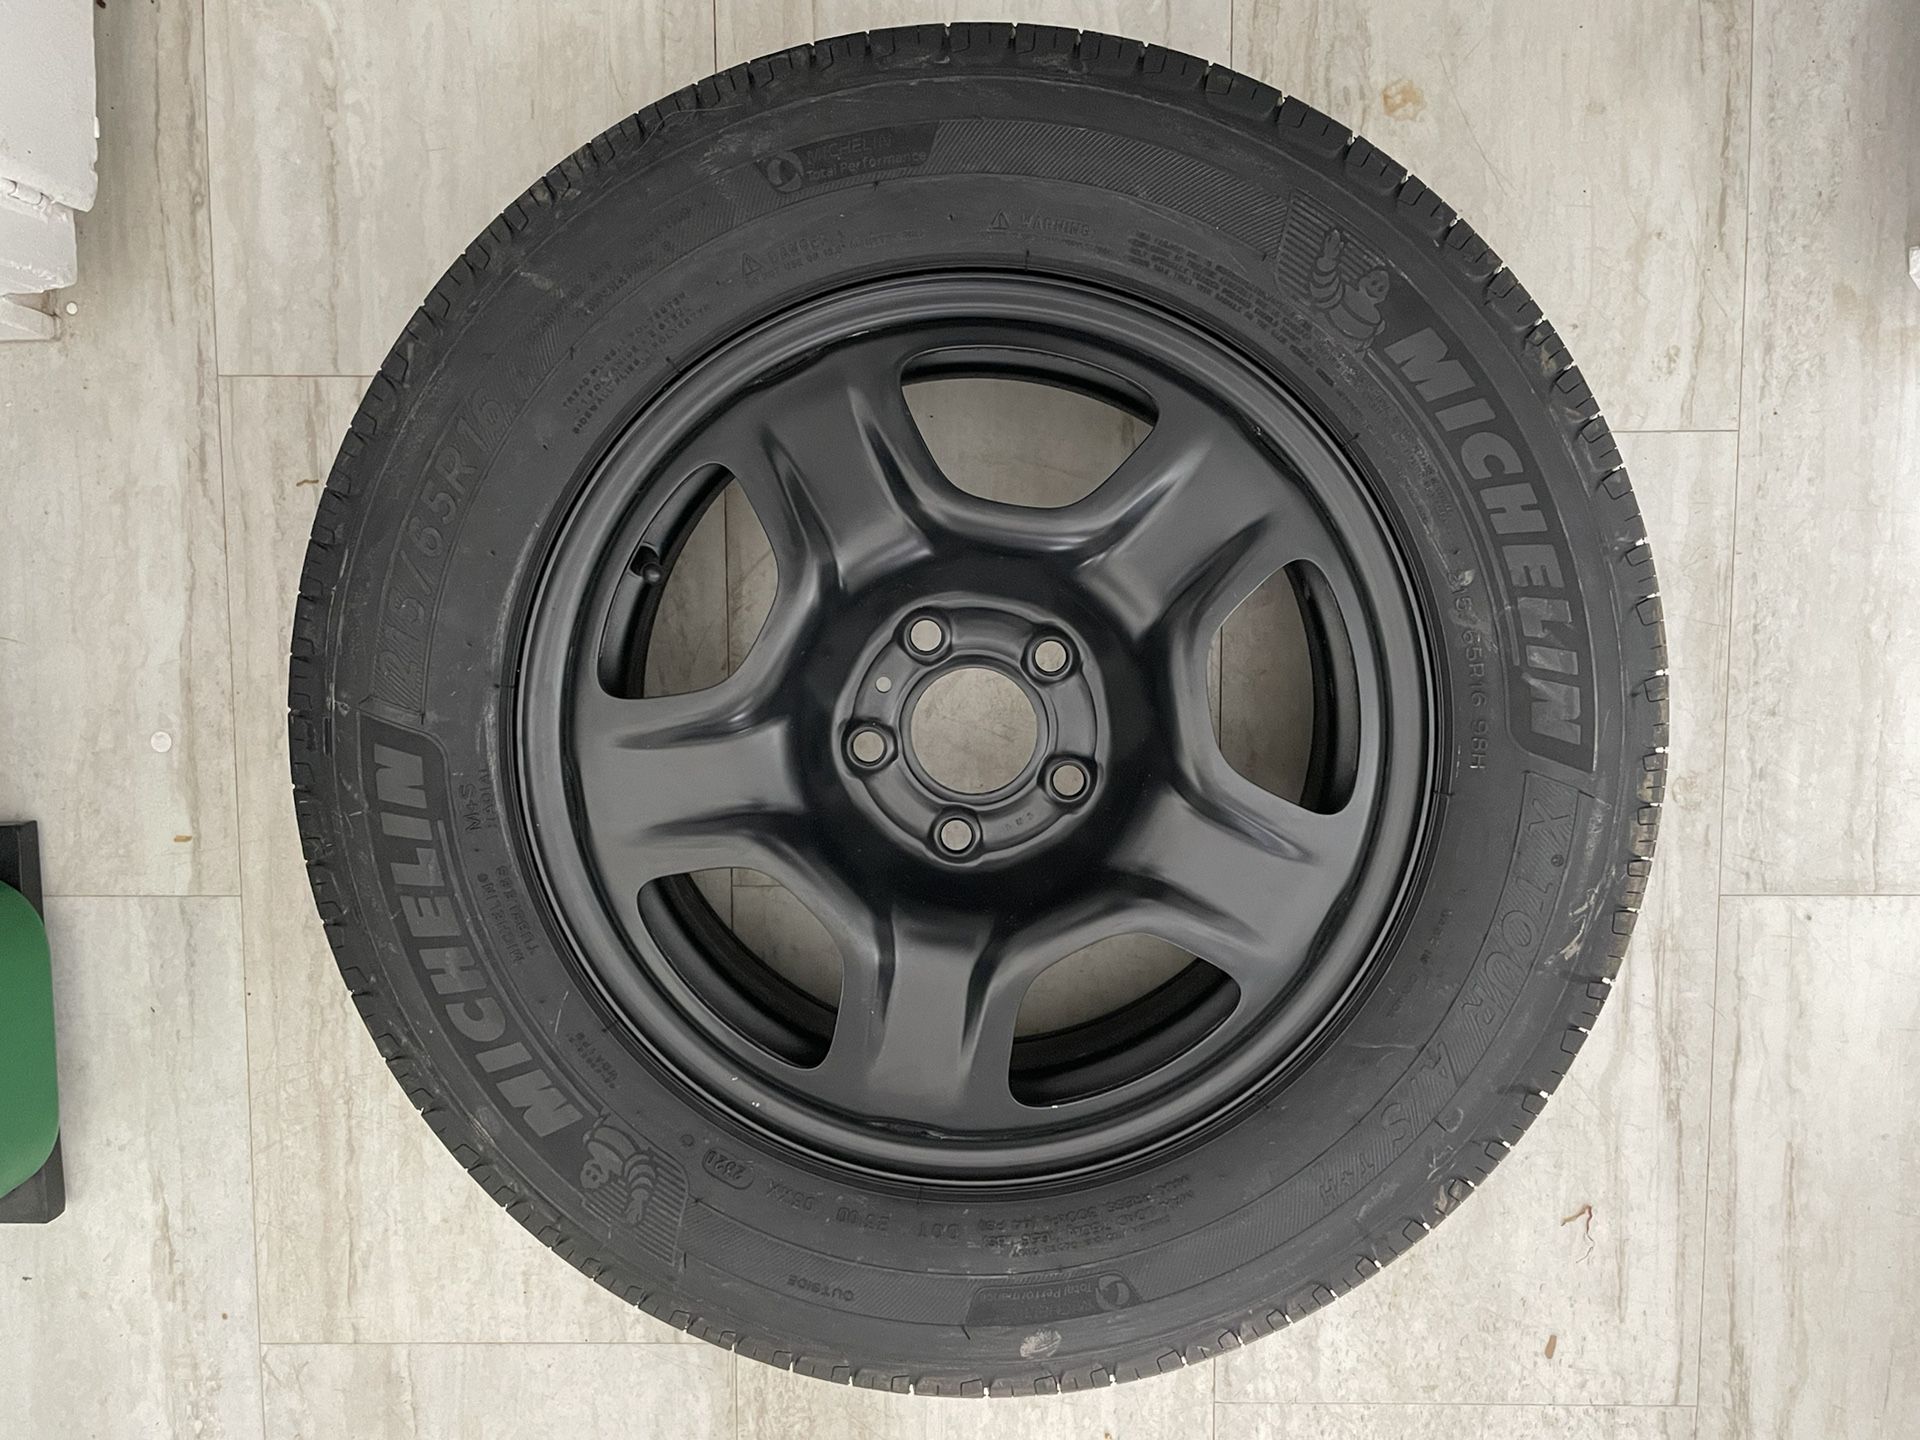 2018 Jeep compass OEM full size wheel and new tire (balanced) *NEW* - $550